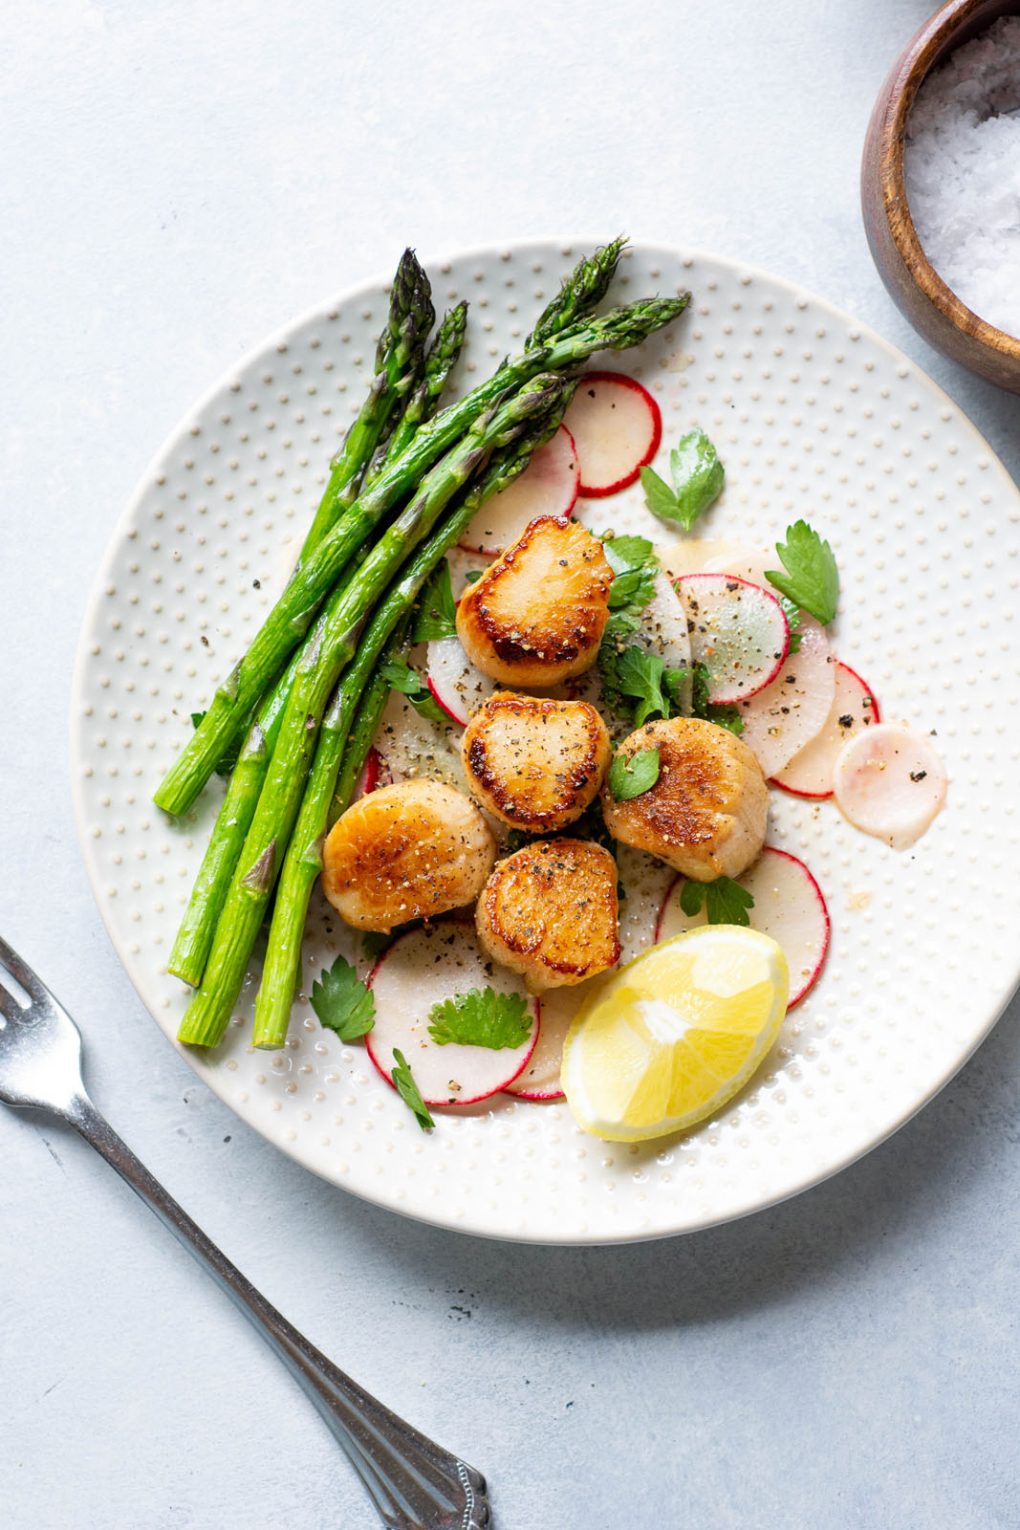 Overhead shot of a white plate with seared scallops over a thinly sliced radish salad, next to a bundle of bright green asparagus. On a light background next to a wooden bowl of flaky sea salt and a silver fork.